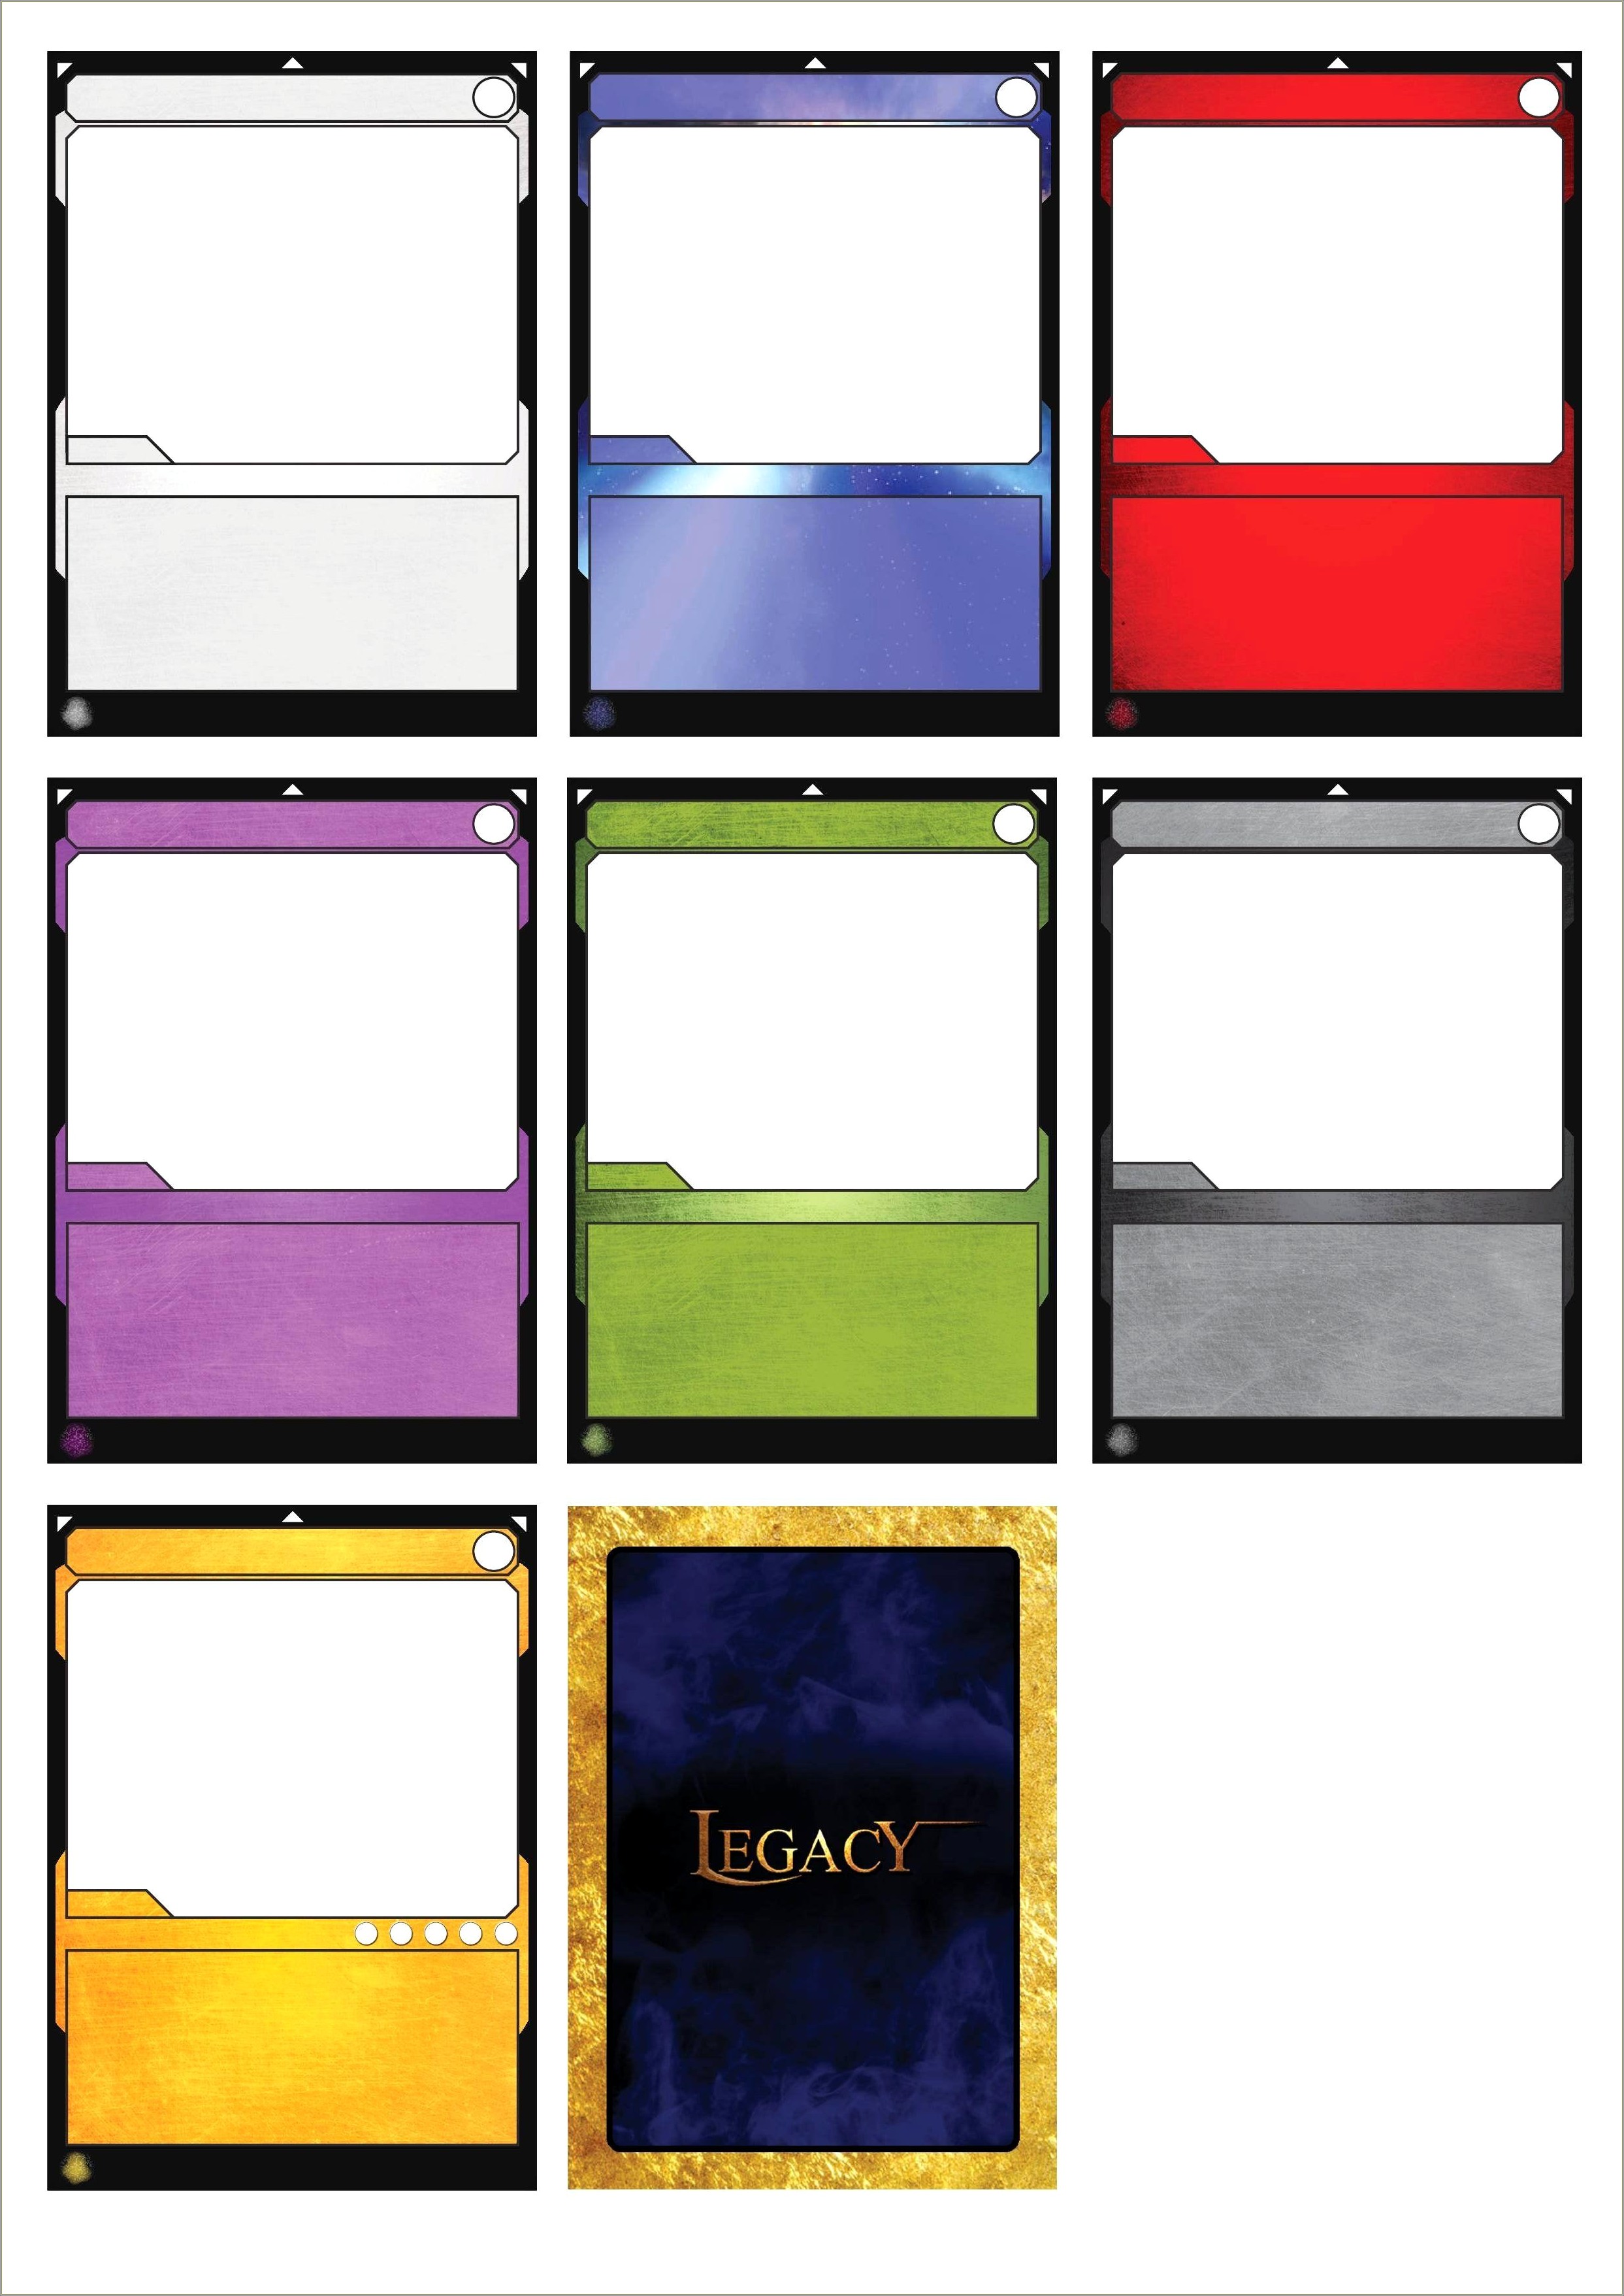 Free Templates For Card And Game Playing